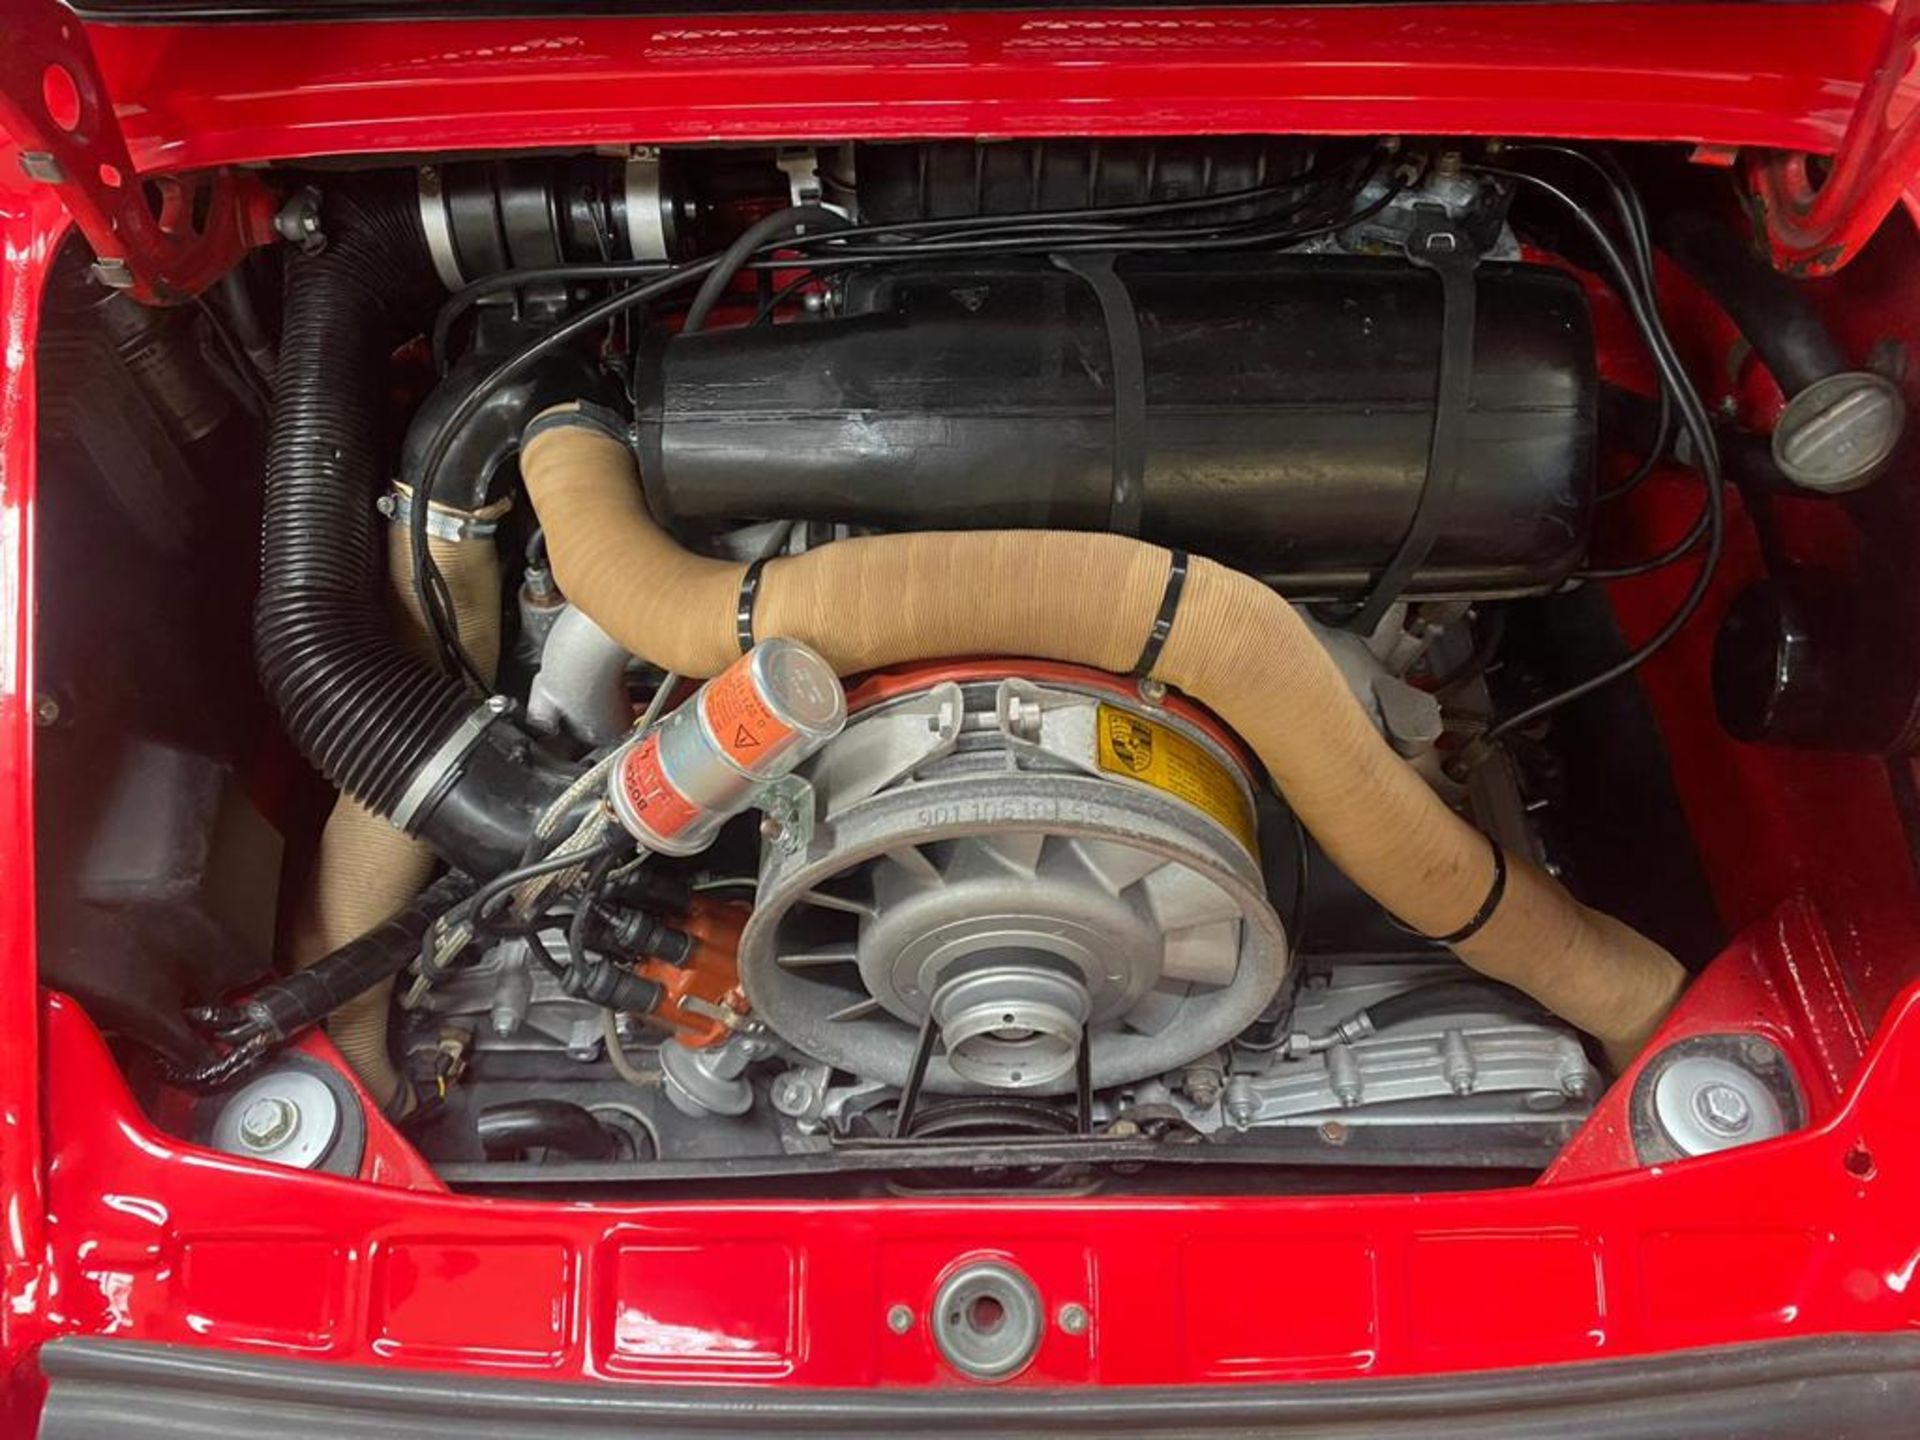 1980 Porsche 911 sc sport but has been fully rebuilt to be identical to a 1974 911 rsr *NO VAT* - Image 9 of 12